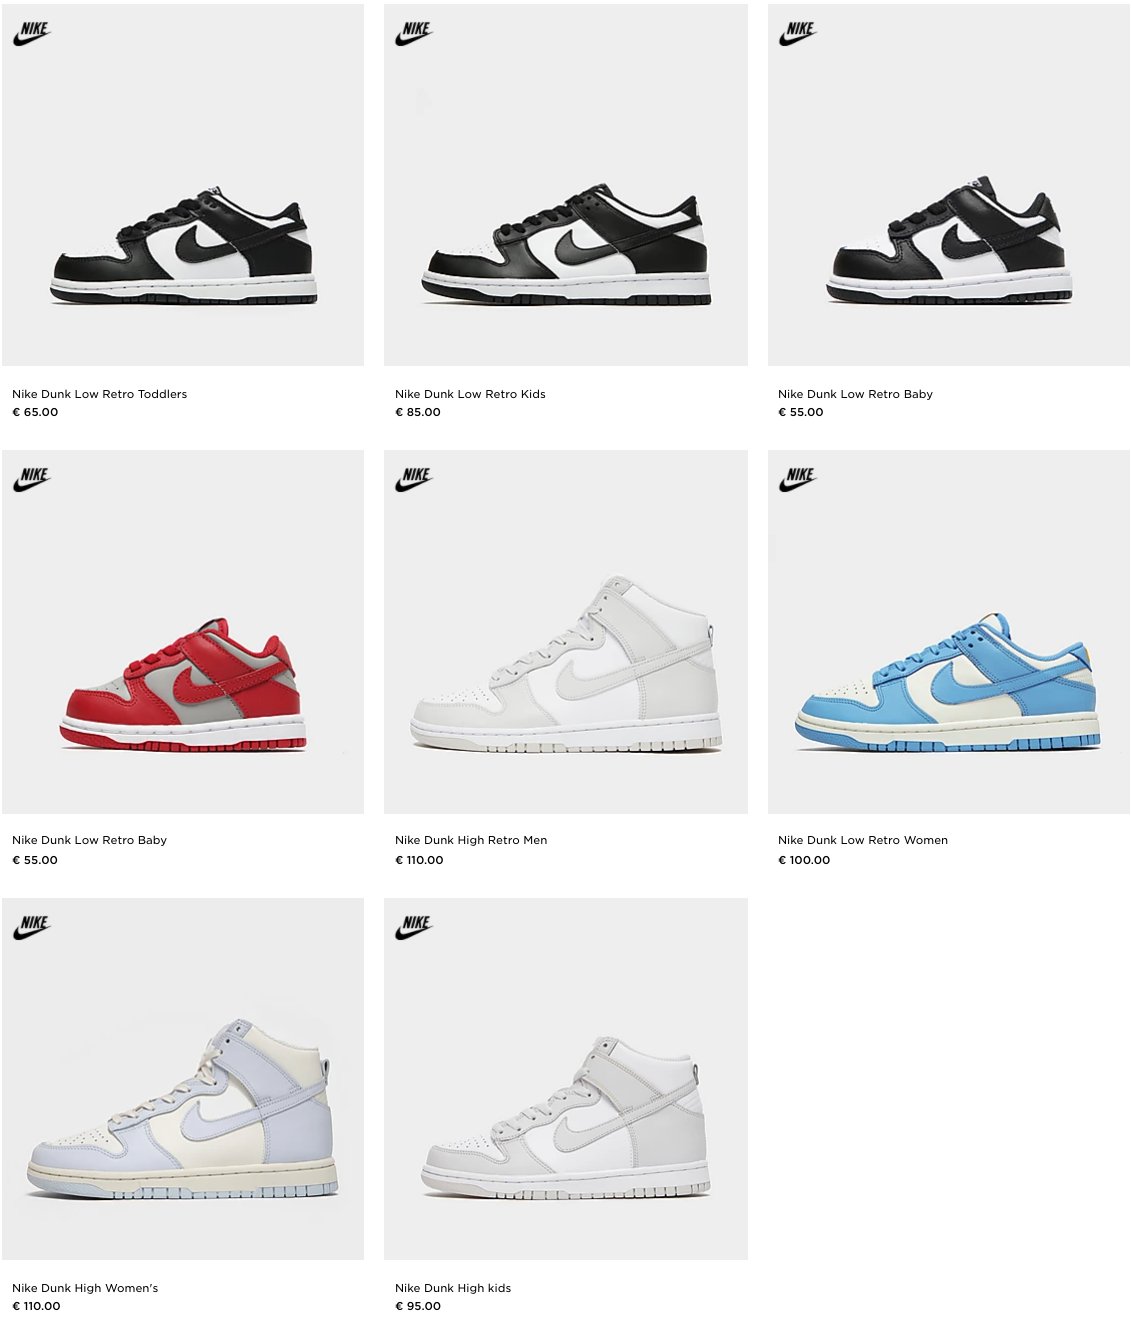 Sneaker Myth on X: "ad: Nike Dunk RESTOCKED At More JD Sports EU Stores! DE  &gt;&gt; https://t.co/vTdrjyQ8kO FR &gt;&gt; https://t.co/deDQYg9US7  https://t.co/cWOPiGOQyE" / X